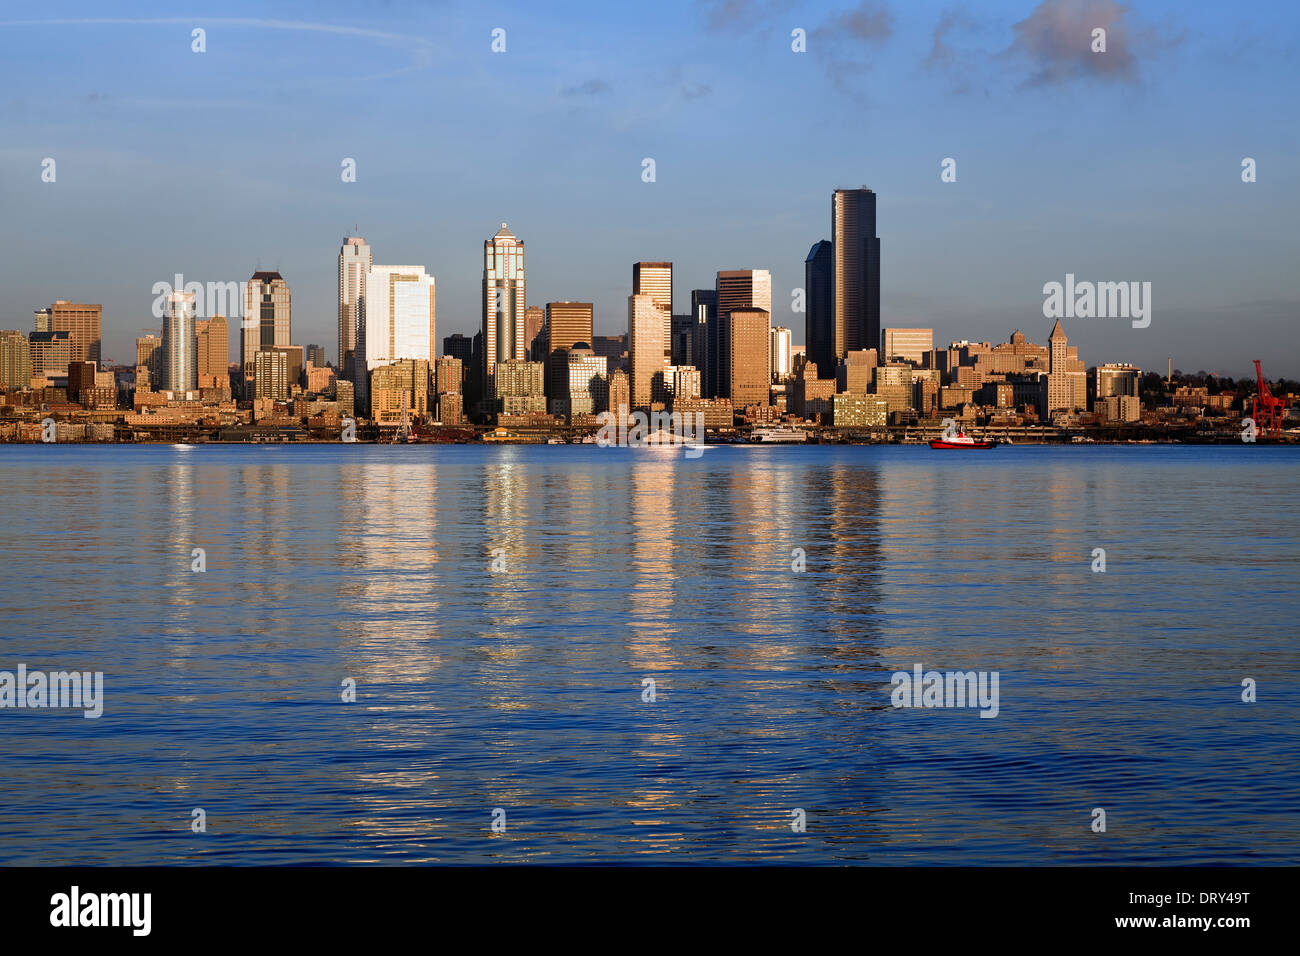 WASHINGTON - The city of Seattle viewed across Elliot Bay from West Seattle. 2013 Stock Photo